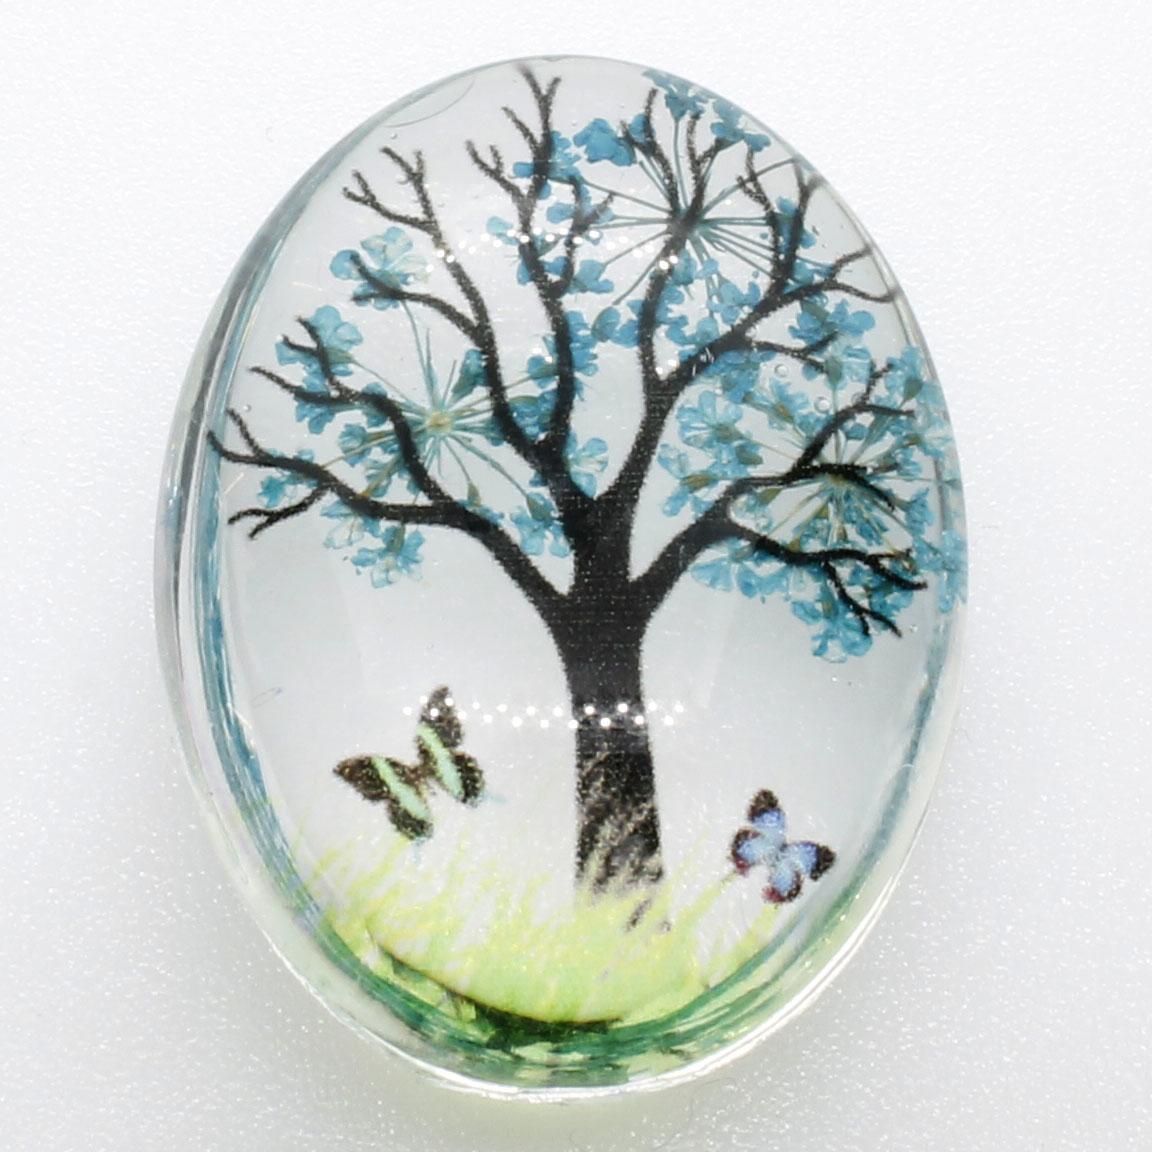 Everbloom Cabochon Oval 40x30mm - Turquoise